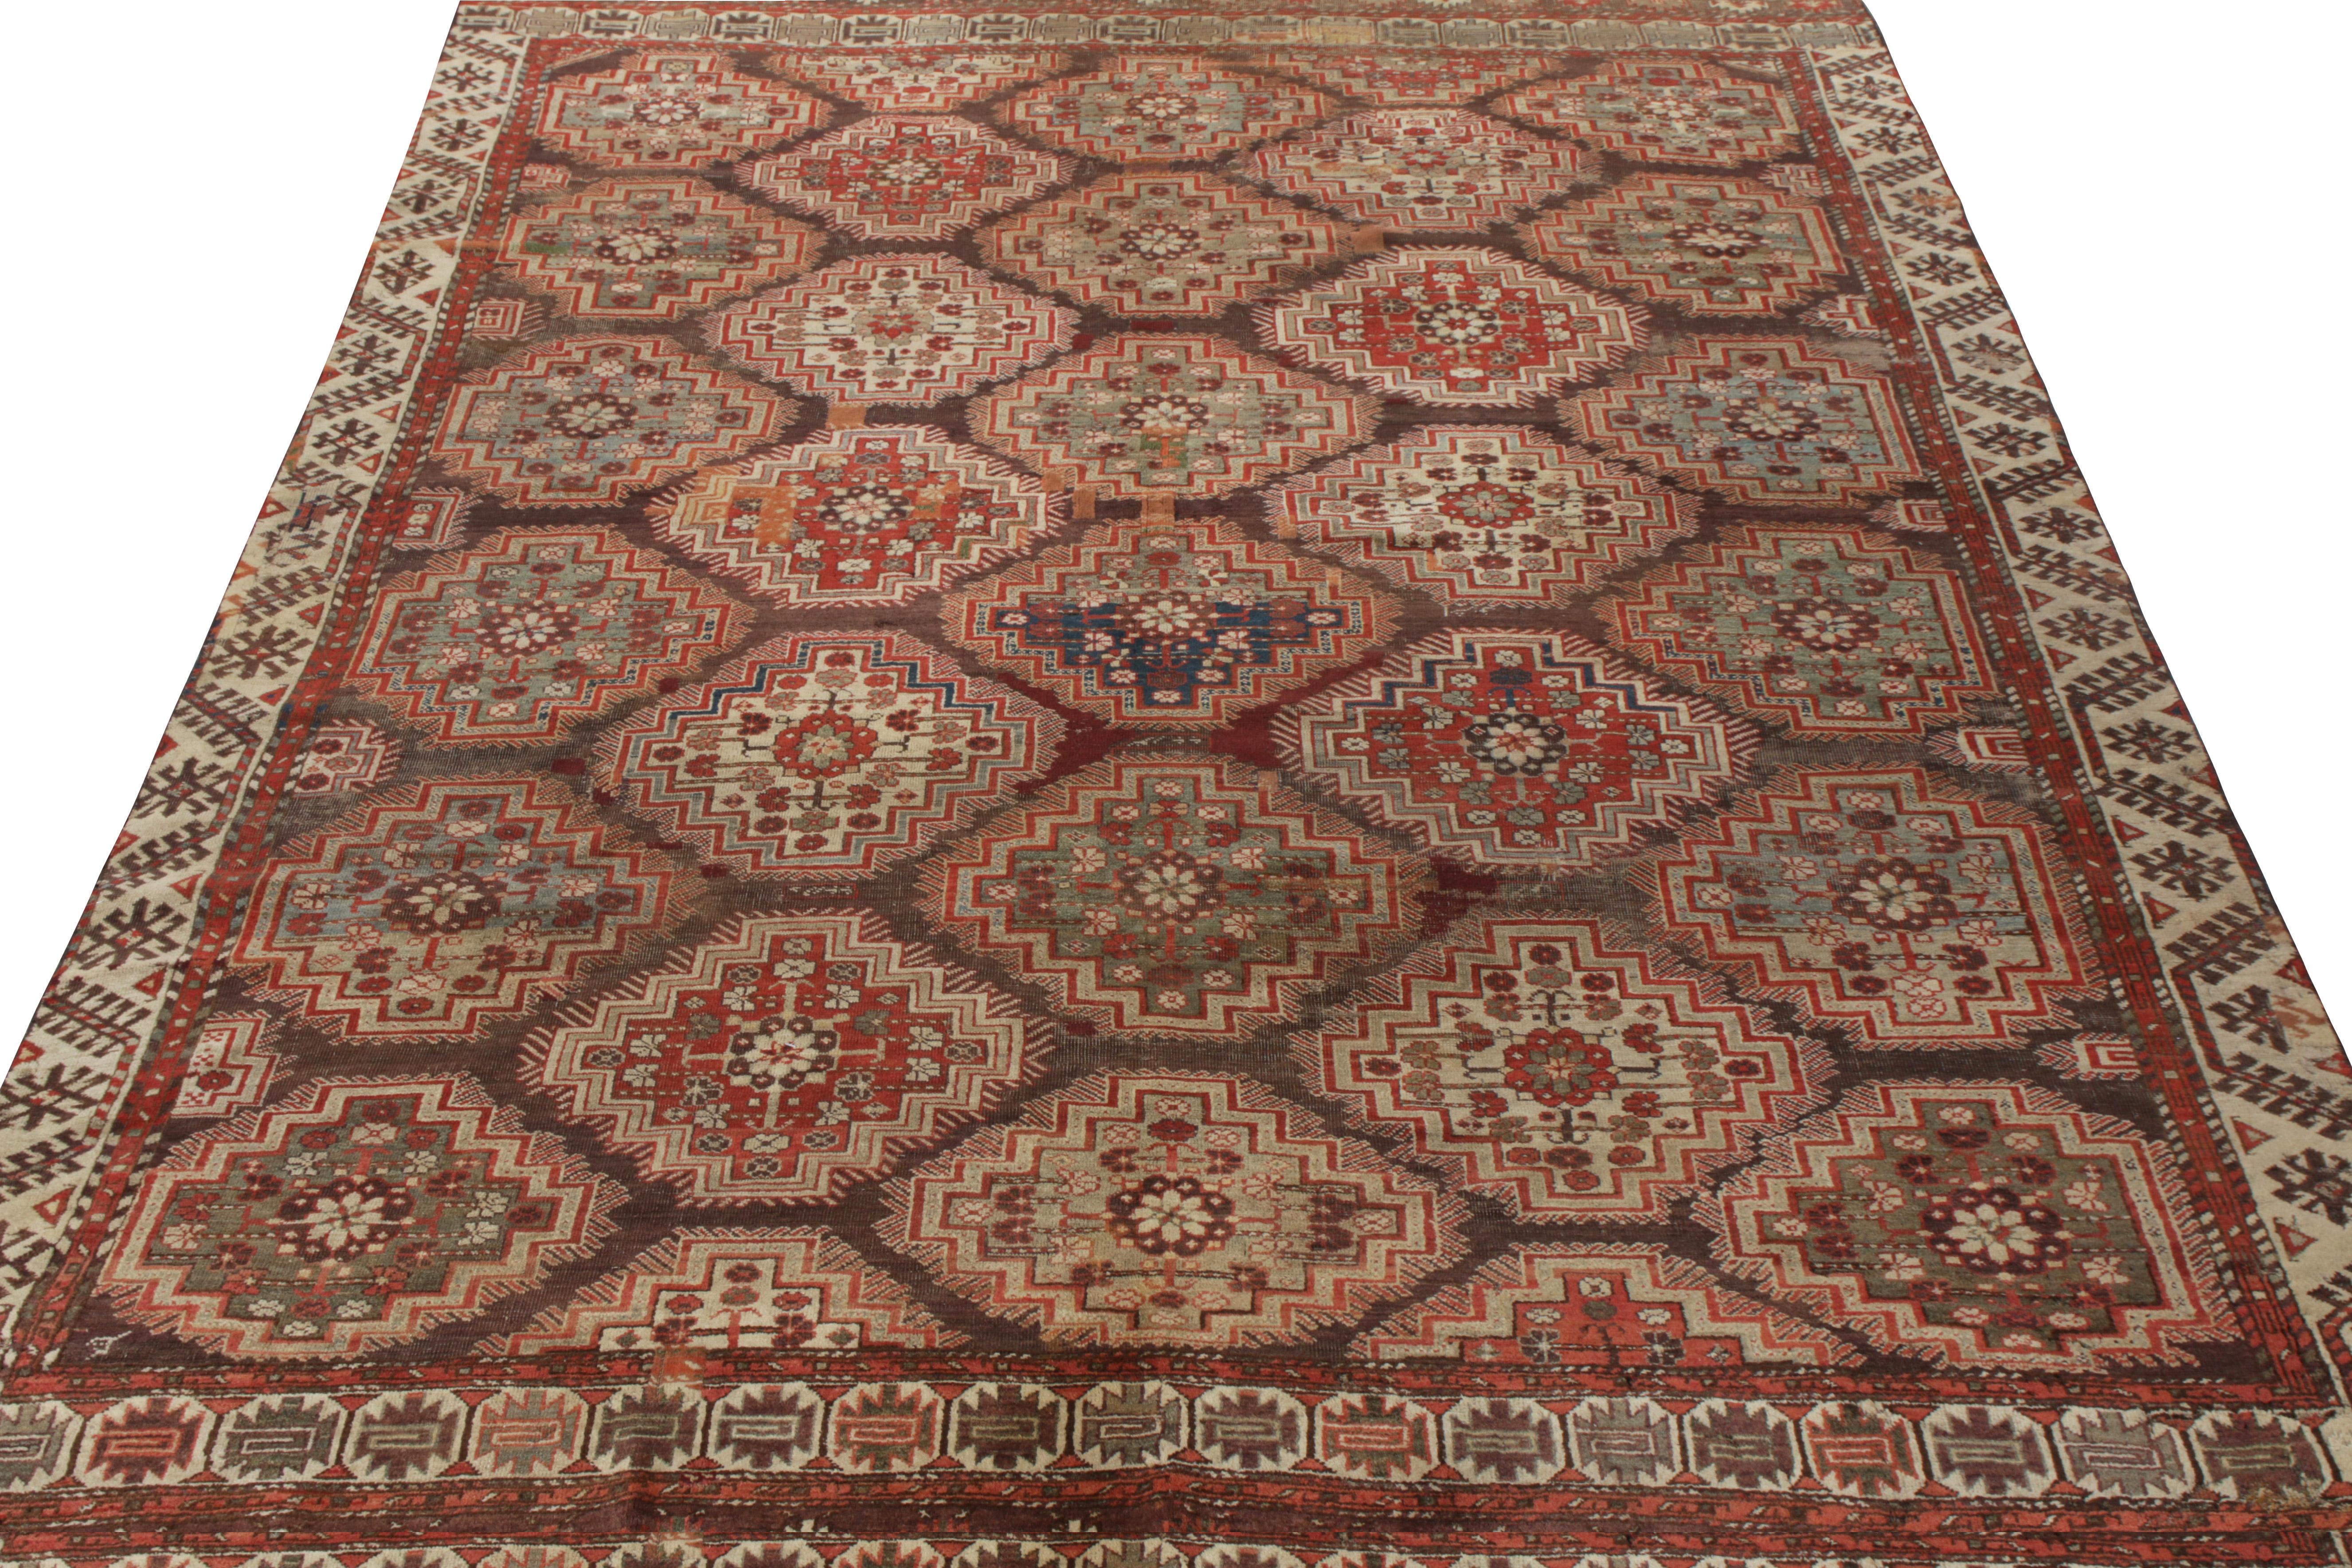 Originating from Russia circa 1860-1880, this tribal antique Kuba rug exhibits an exemplary show of geometric design. The 7x10 masterpiece boasts a delicious stepped diamond pattern cocooning a well defined geometric-floral design in shades of red,